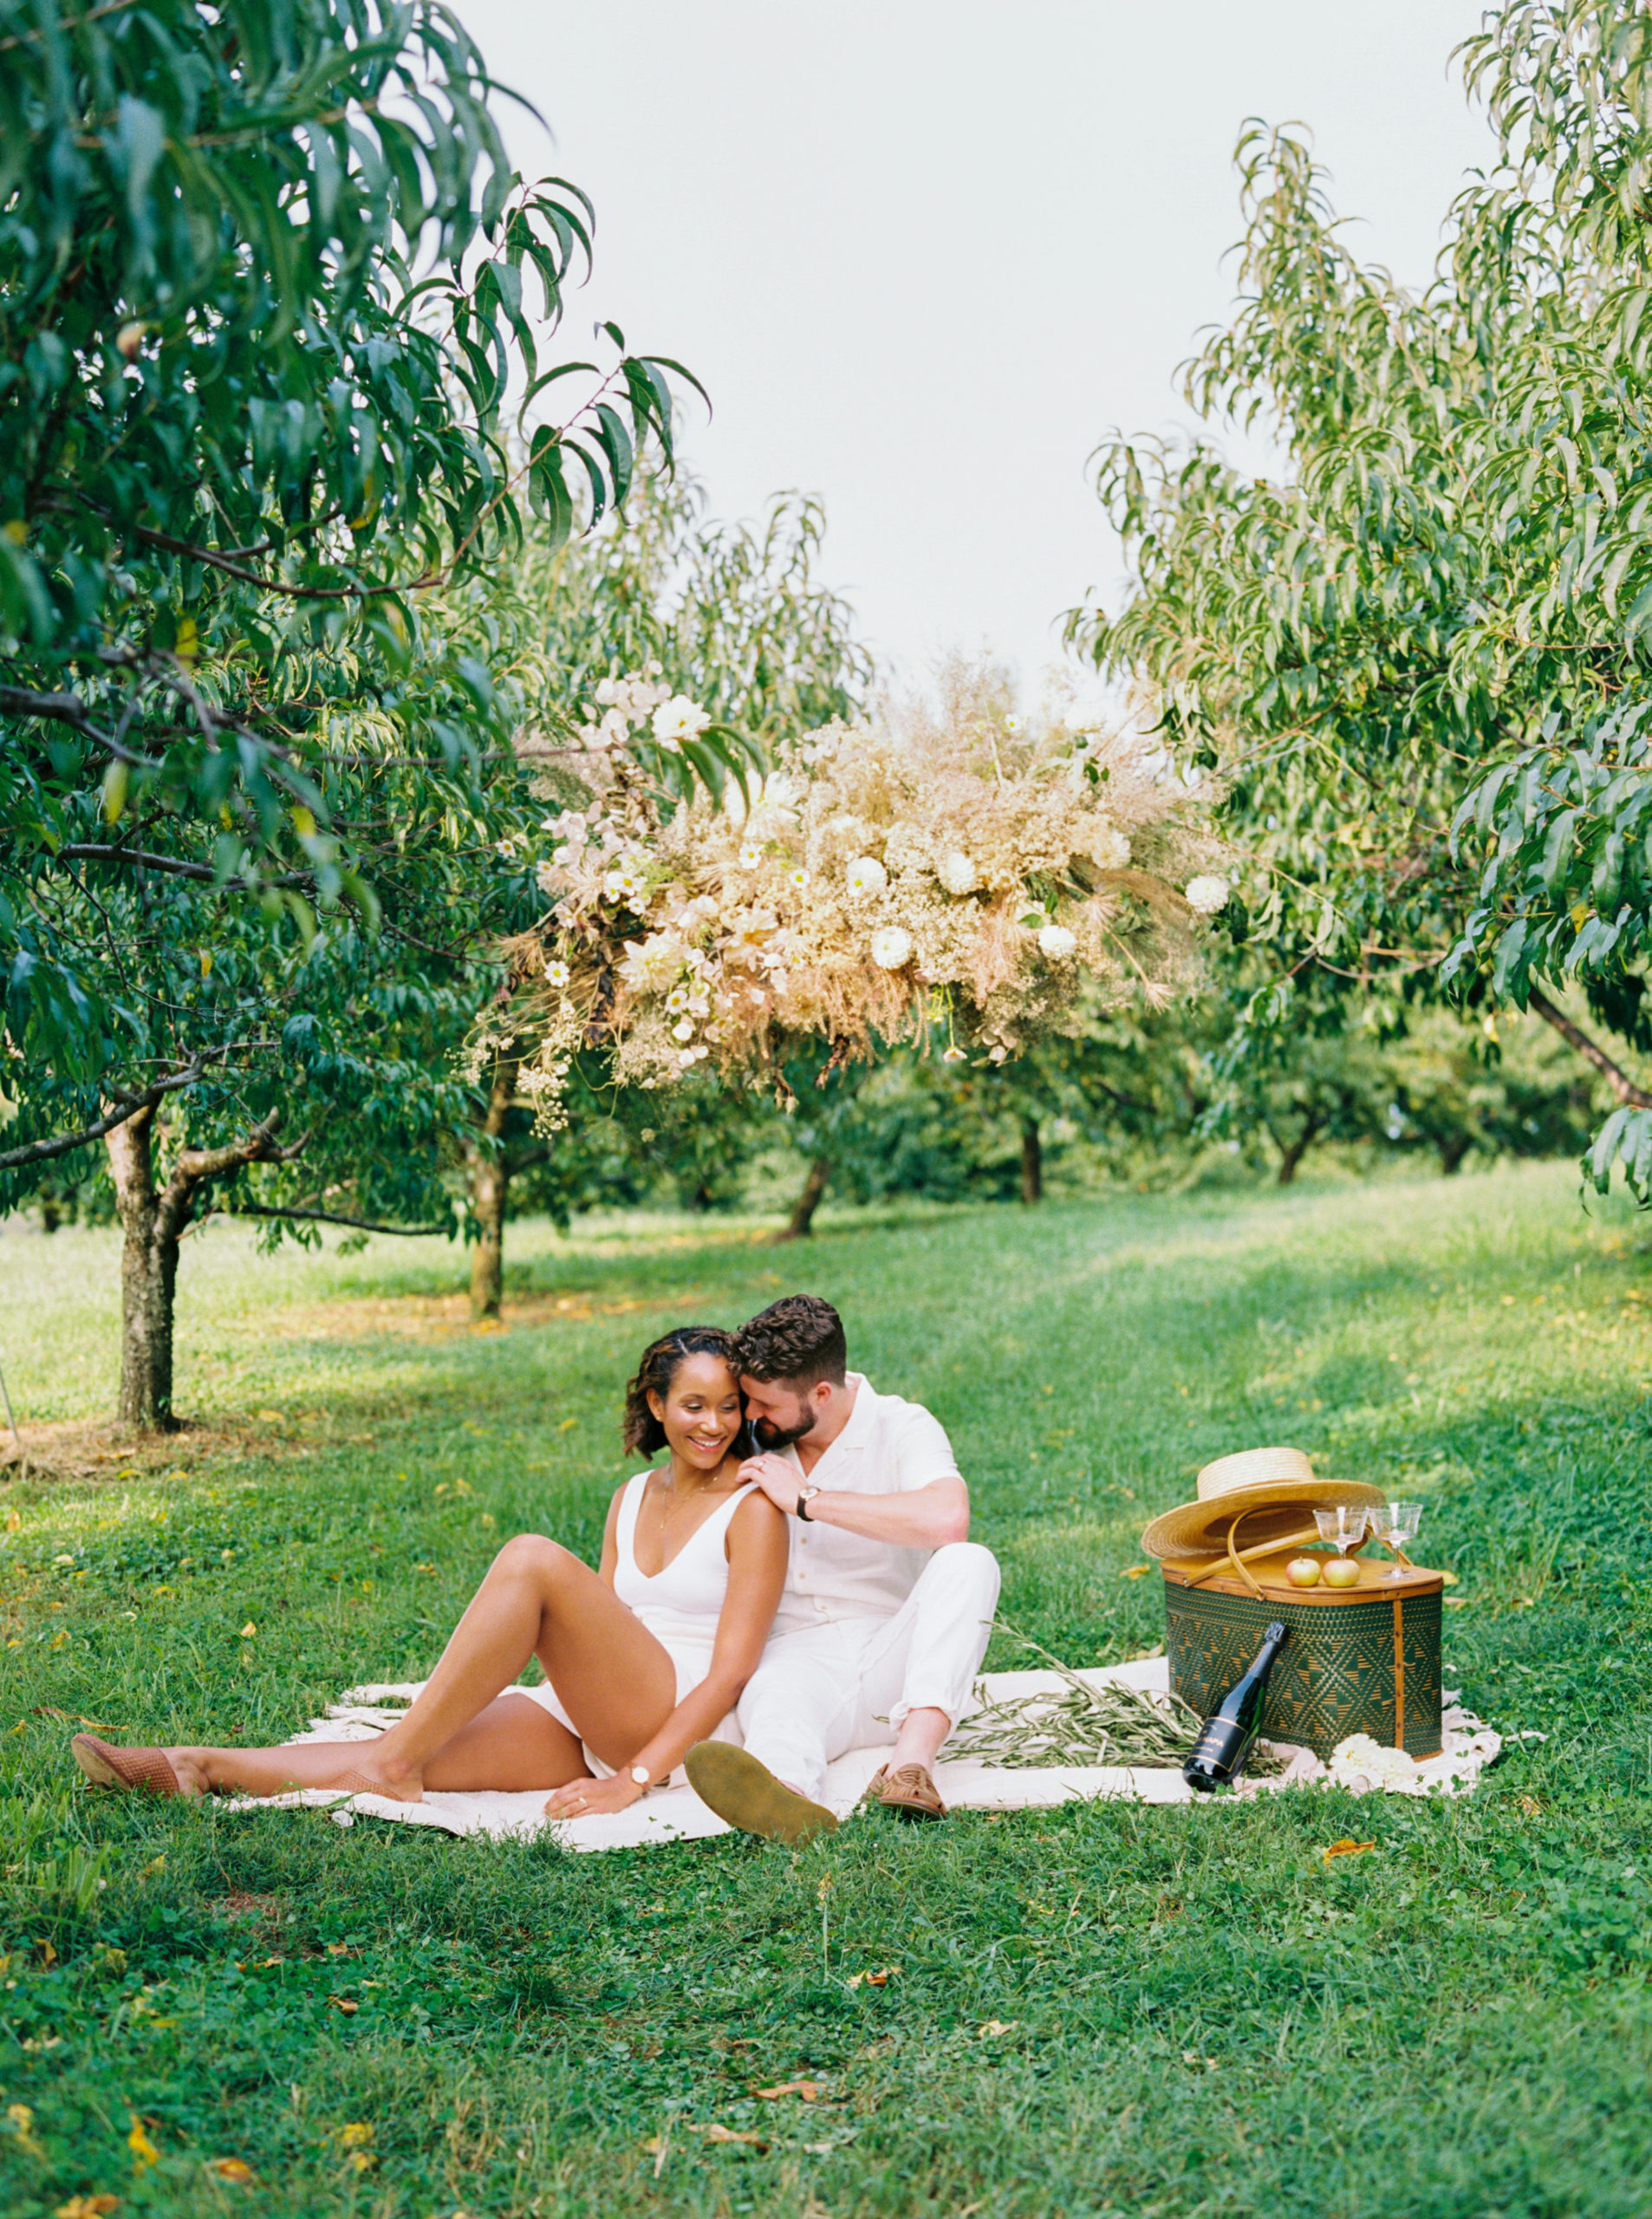 A man leans over to kiss his wife while they sit on a picnic blanket during their The Market at Grelen Anniversary Photo Shoot. Image by Victoria Heer, Washington DC wedding photographer.